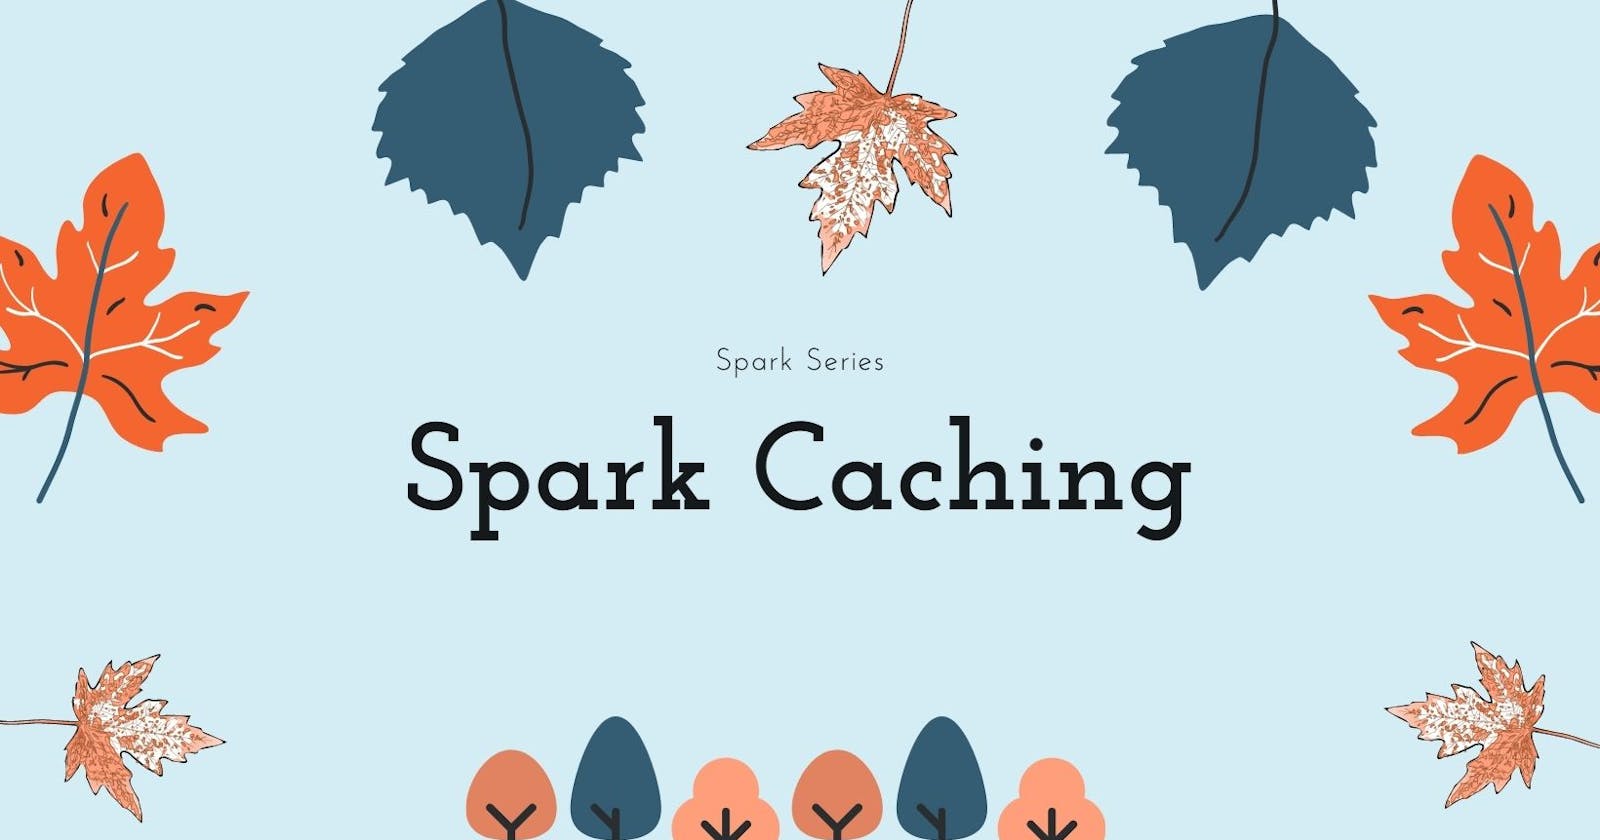 Spark Caching, when and how?